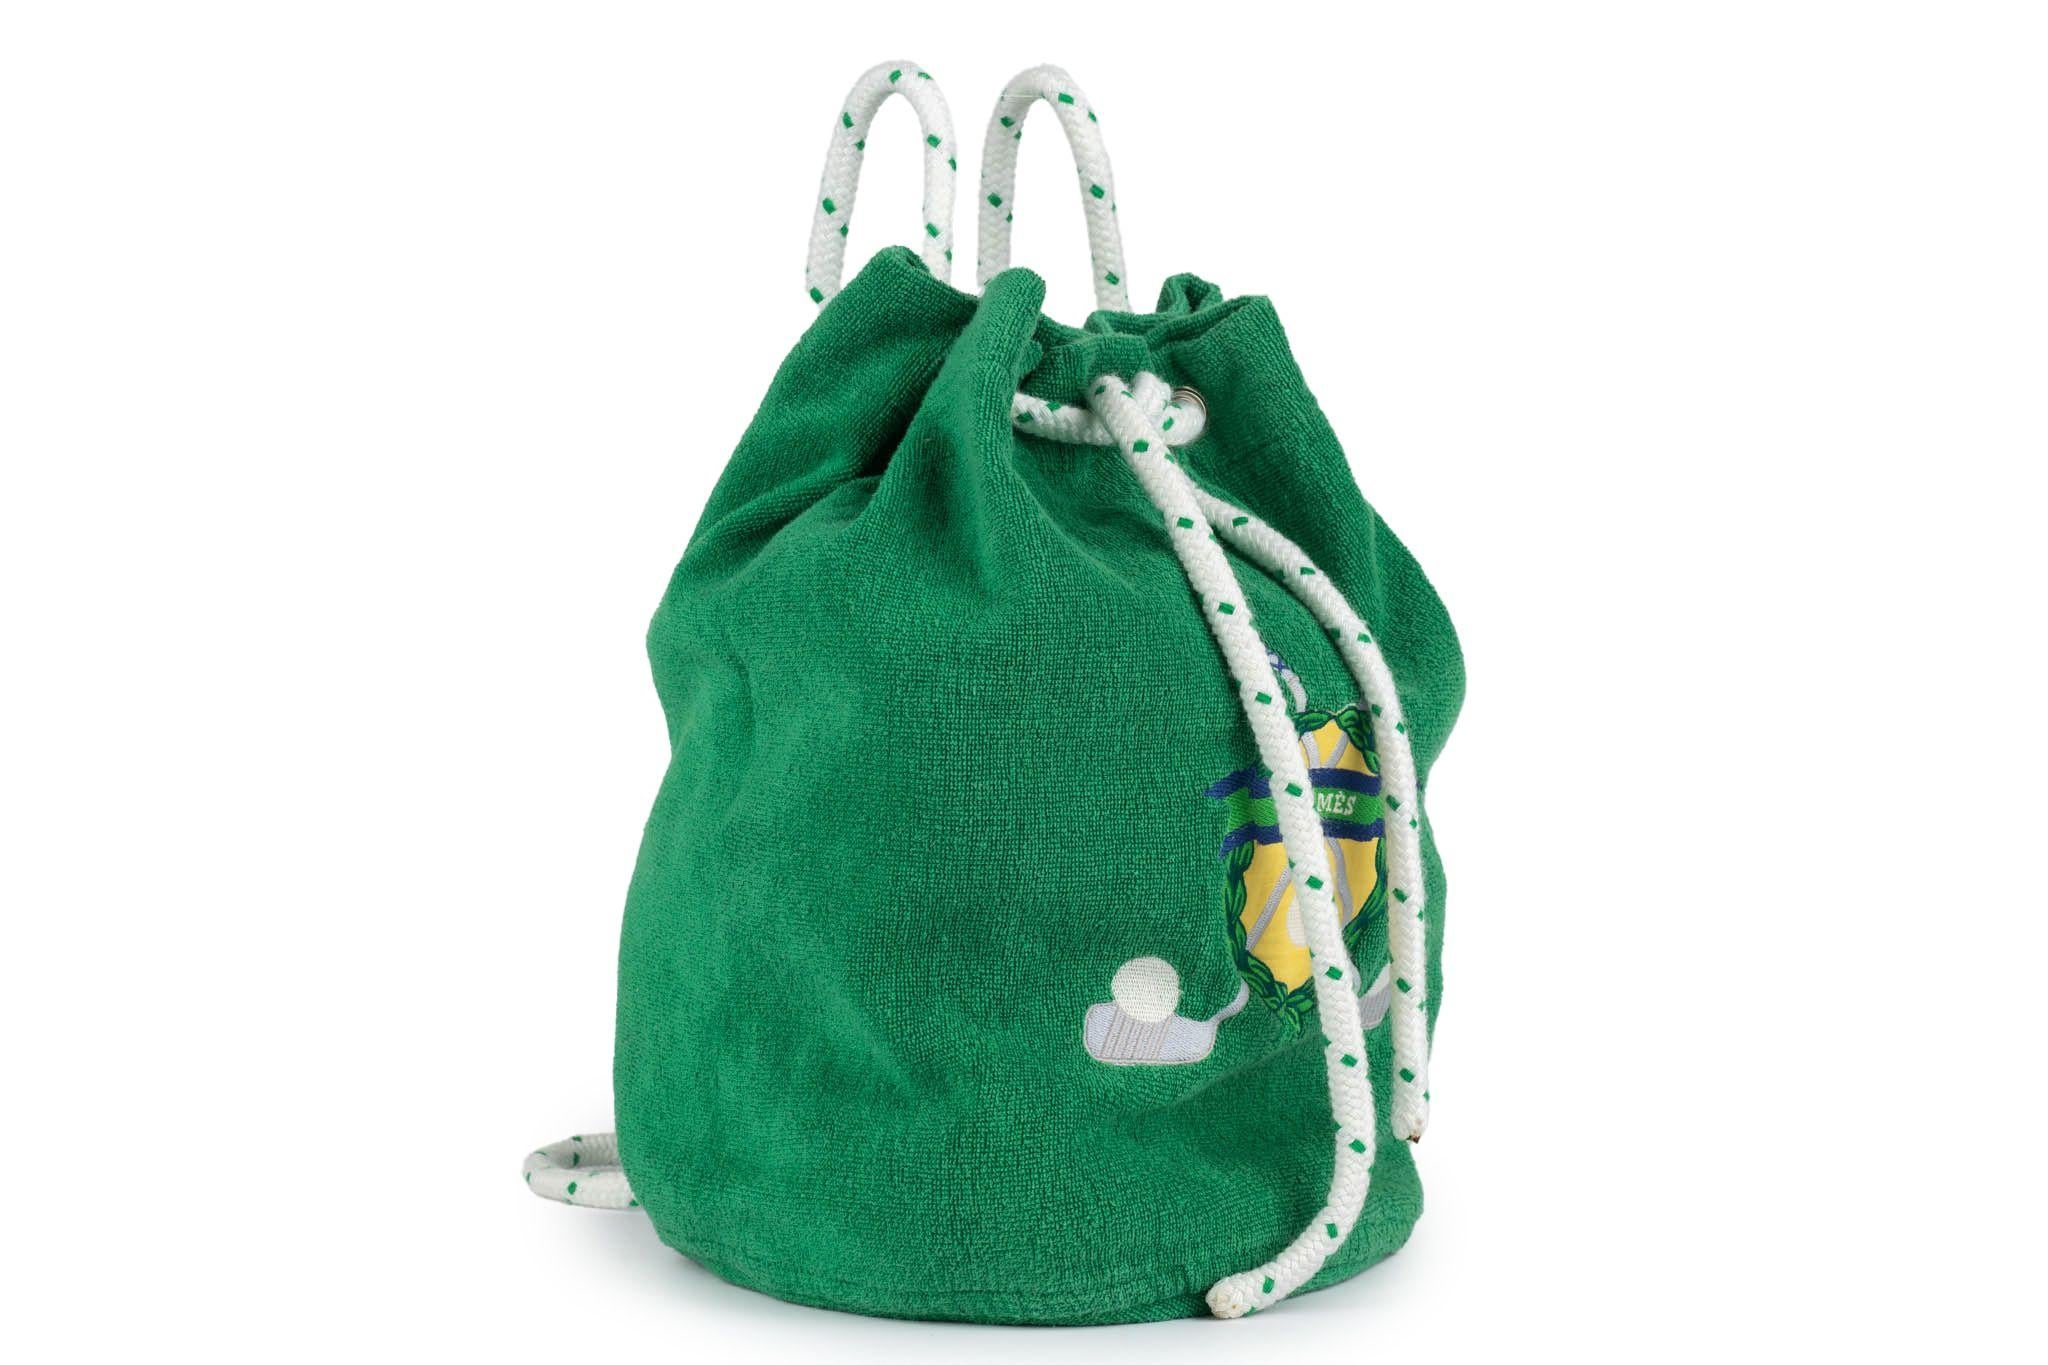 Hermès green golf terry cloth beach drawstring bag, white cord, adjustable straps. Please read label for washing instructions. Excellent condition.